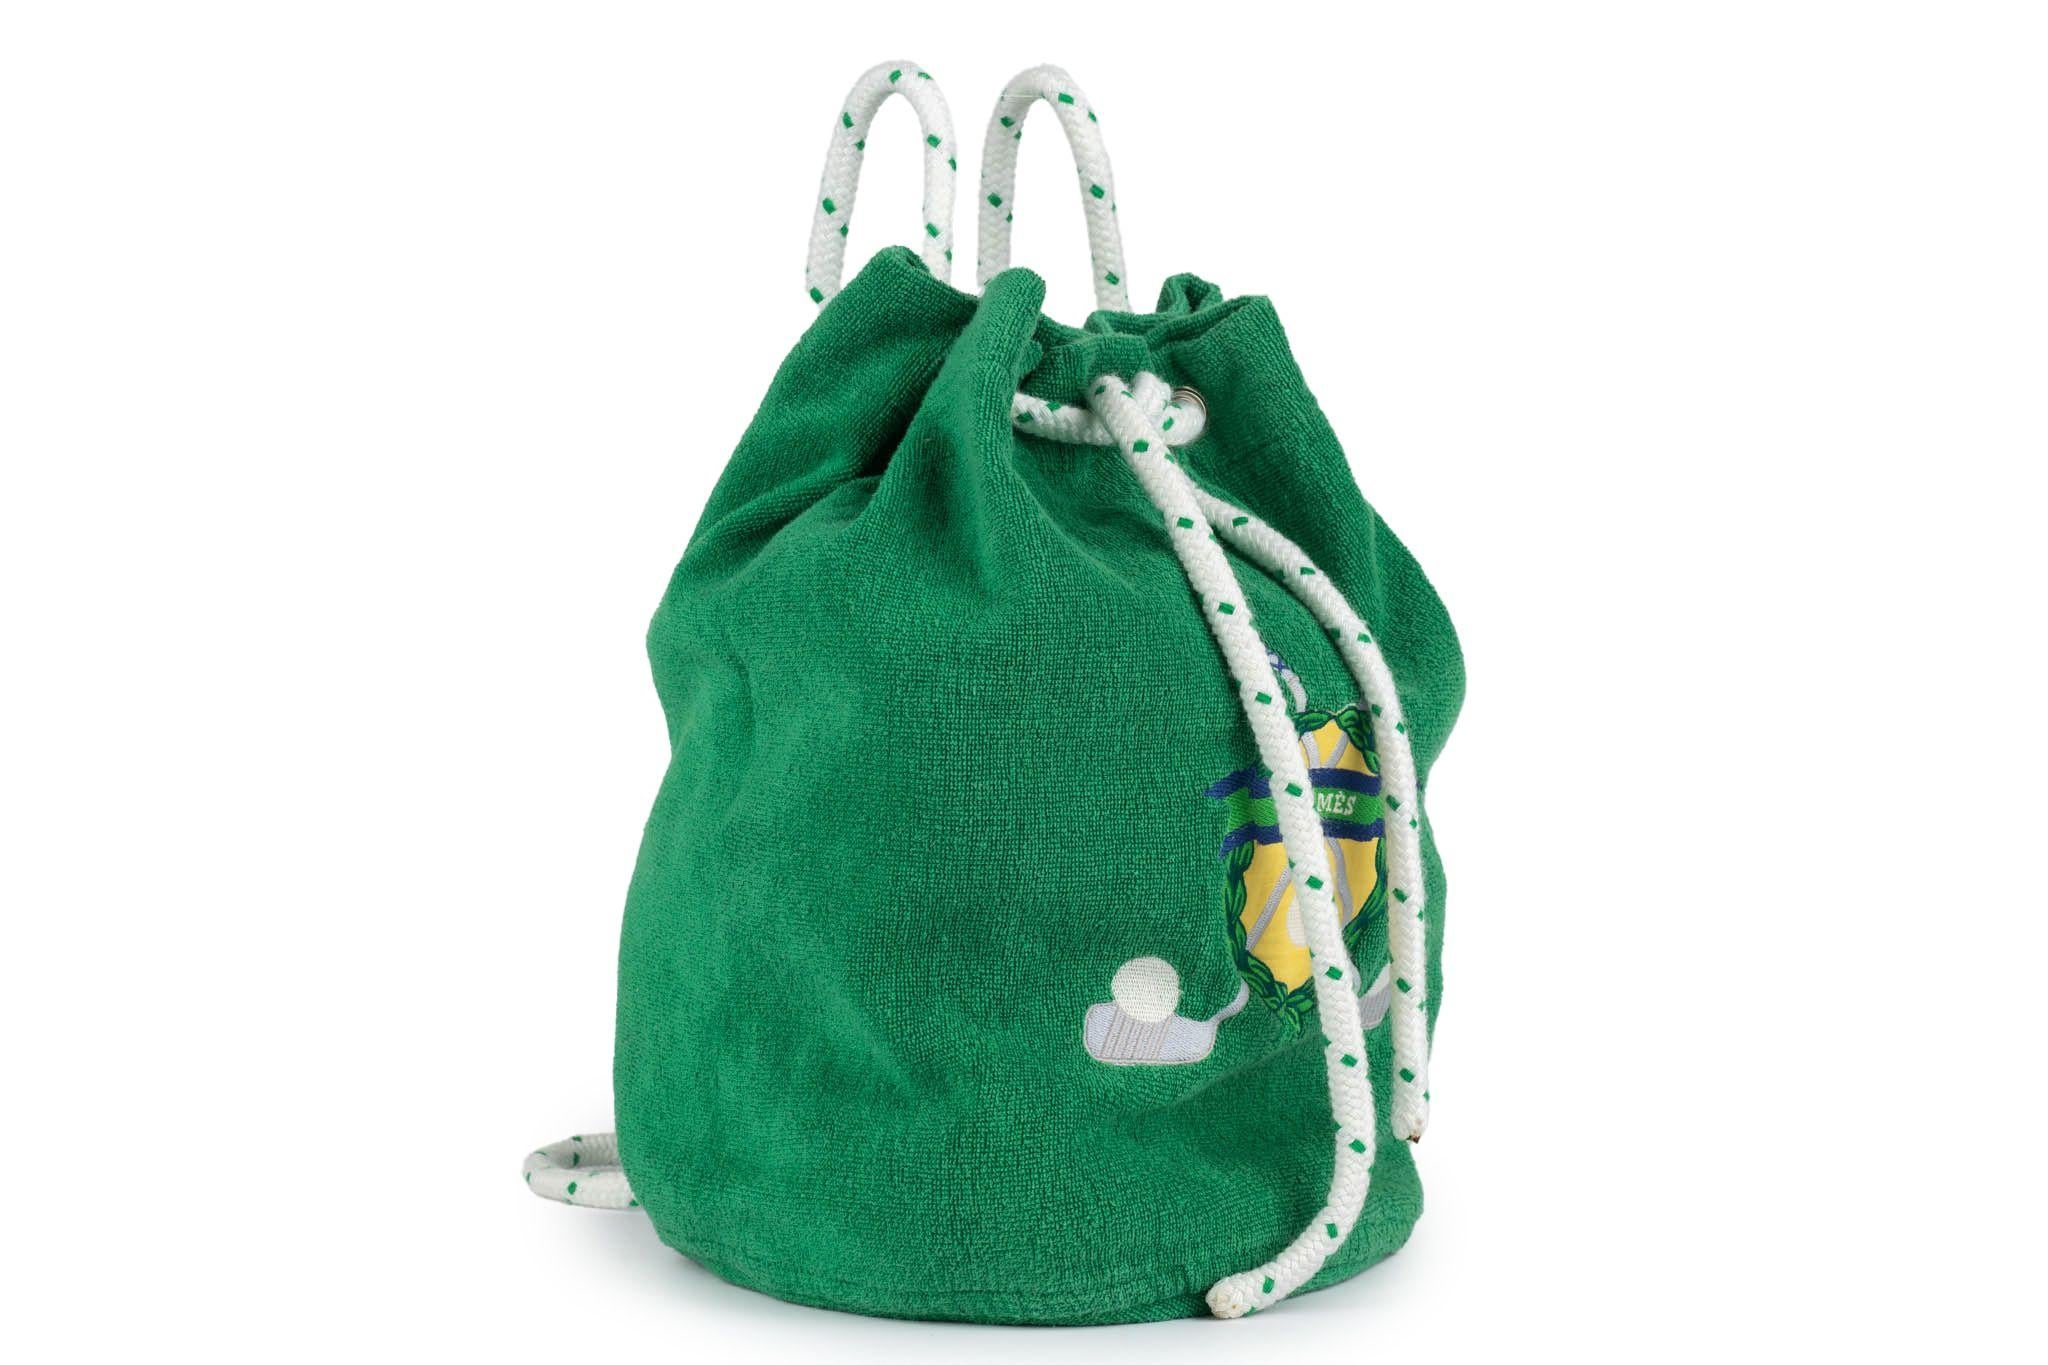 Hermès green golf terry cloth beach drawstring bag, white cord, adjustable straps. Please read label for washing instructions. Excellent condition.